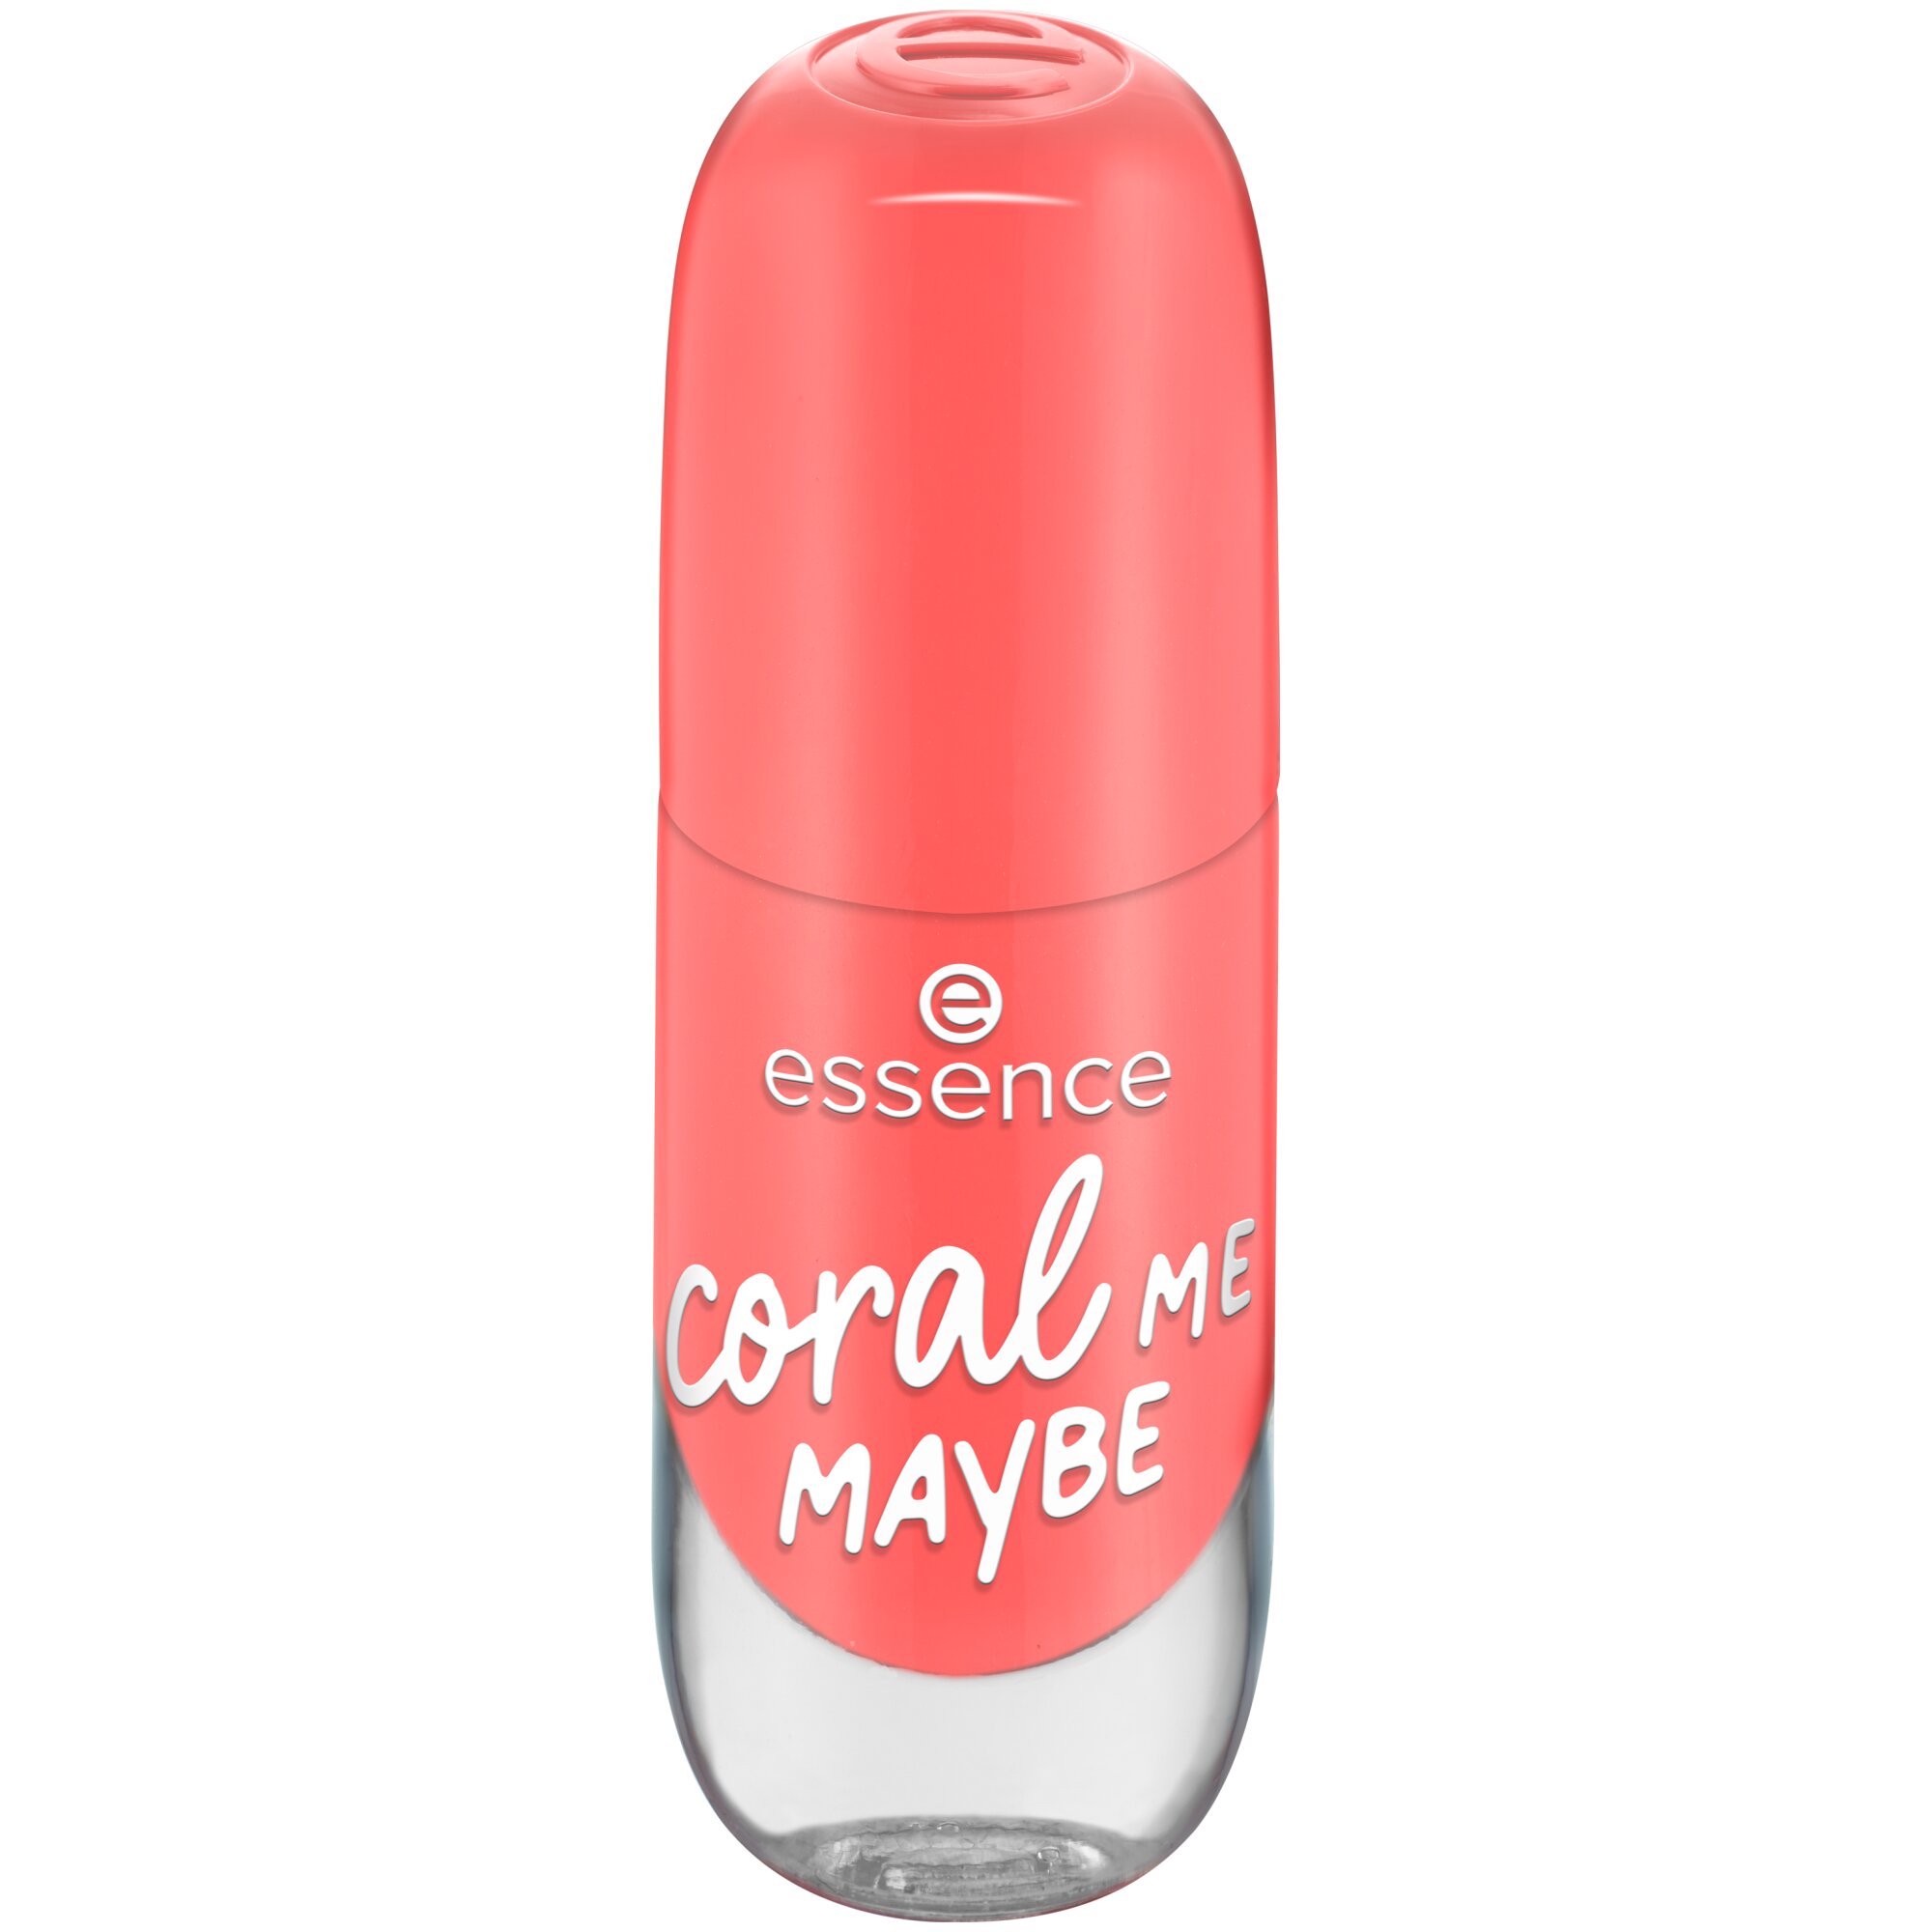 Lac pentru unghii Gel Nail Color, 52 - Coral Me Maybe, 8 ml, Essence